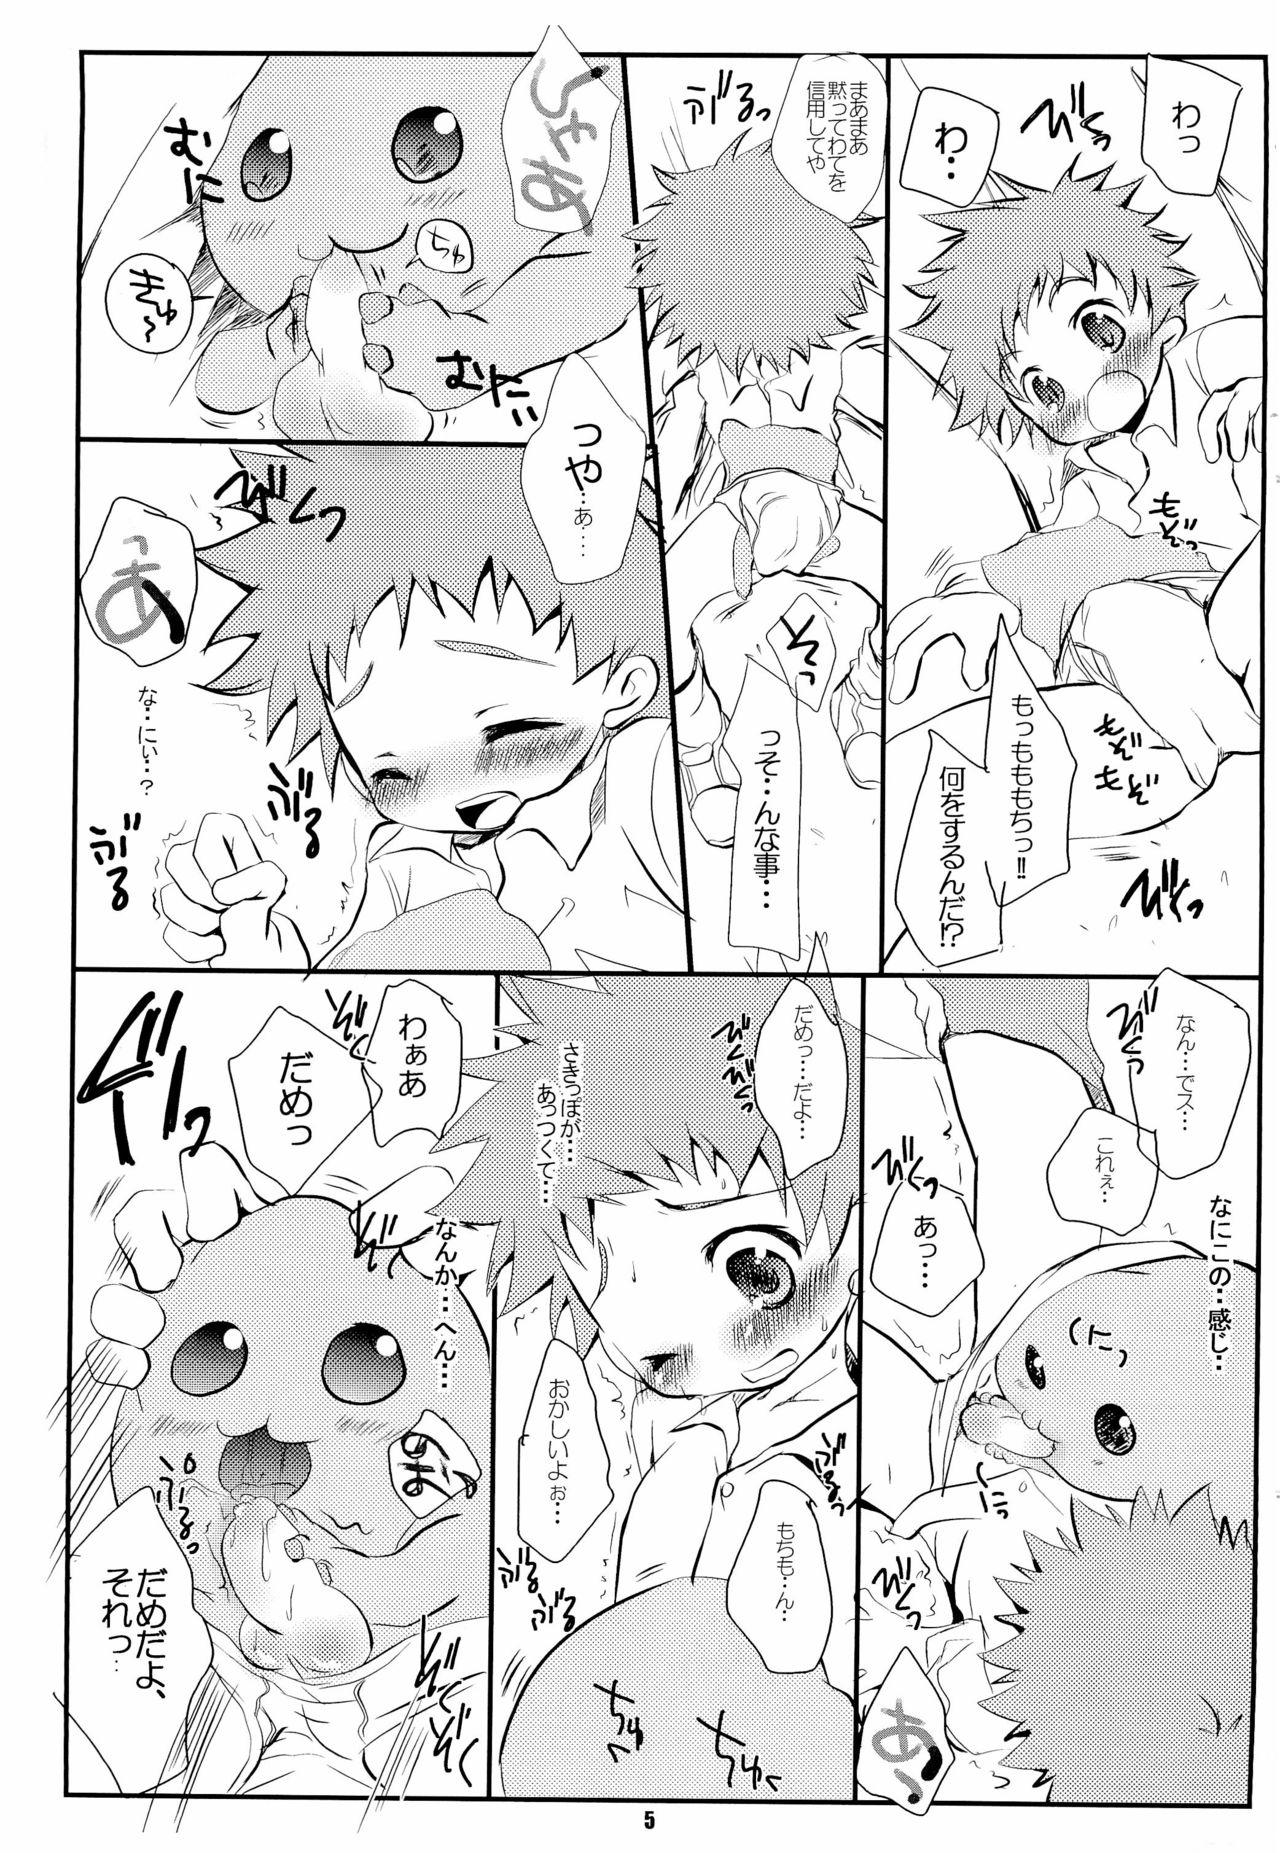 Young Tits Digital - Digimon adventure Digimon Classroom - Page 5